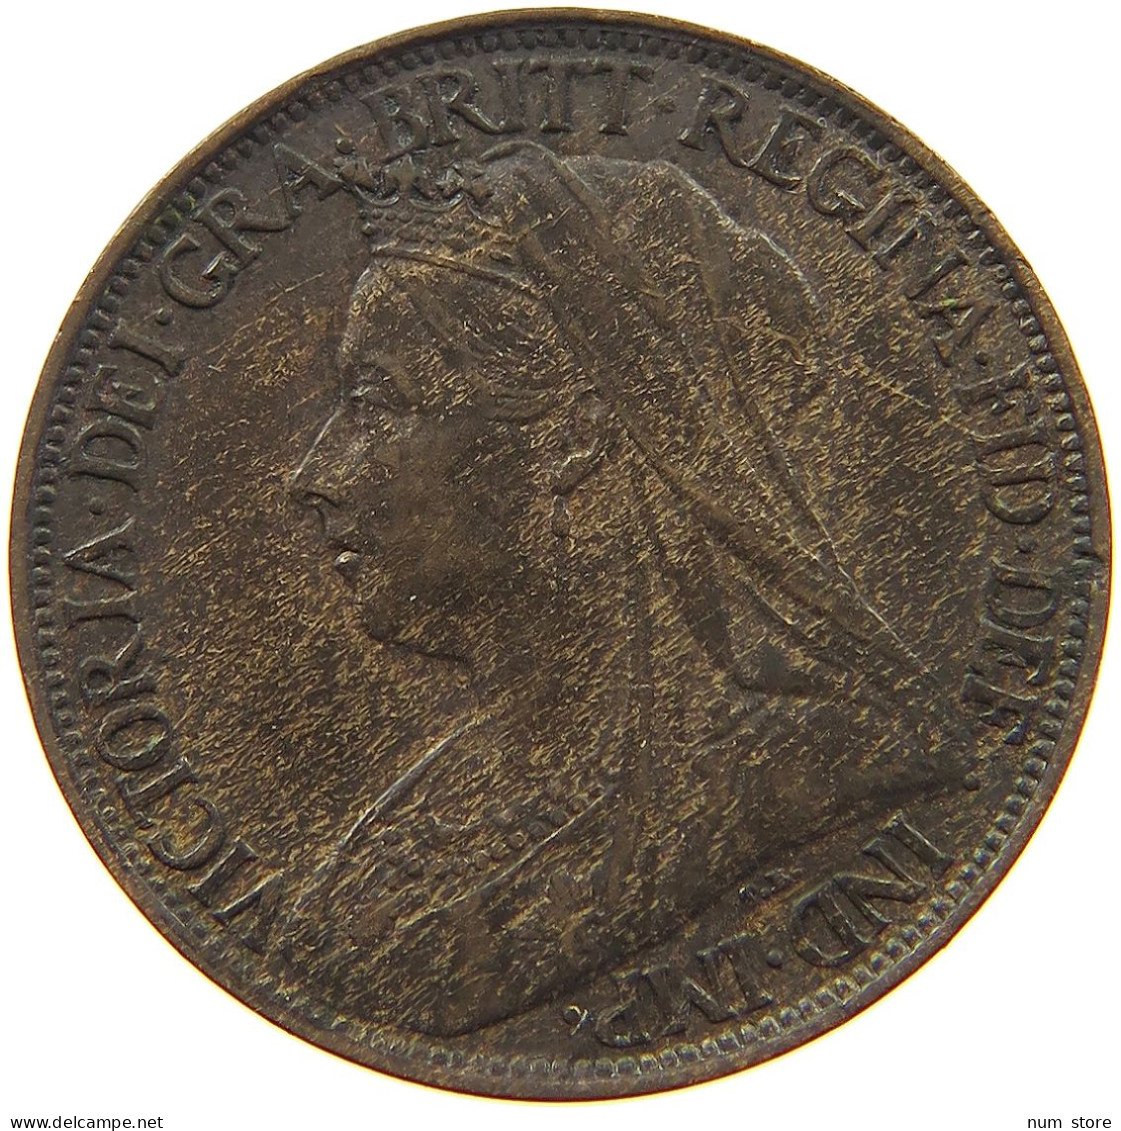 GREAT BRITAIN FARTHING 1897 Victoria 1837-1901 #a011 0977 - B. 1 Farthing